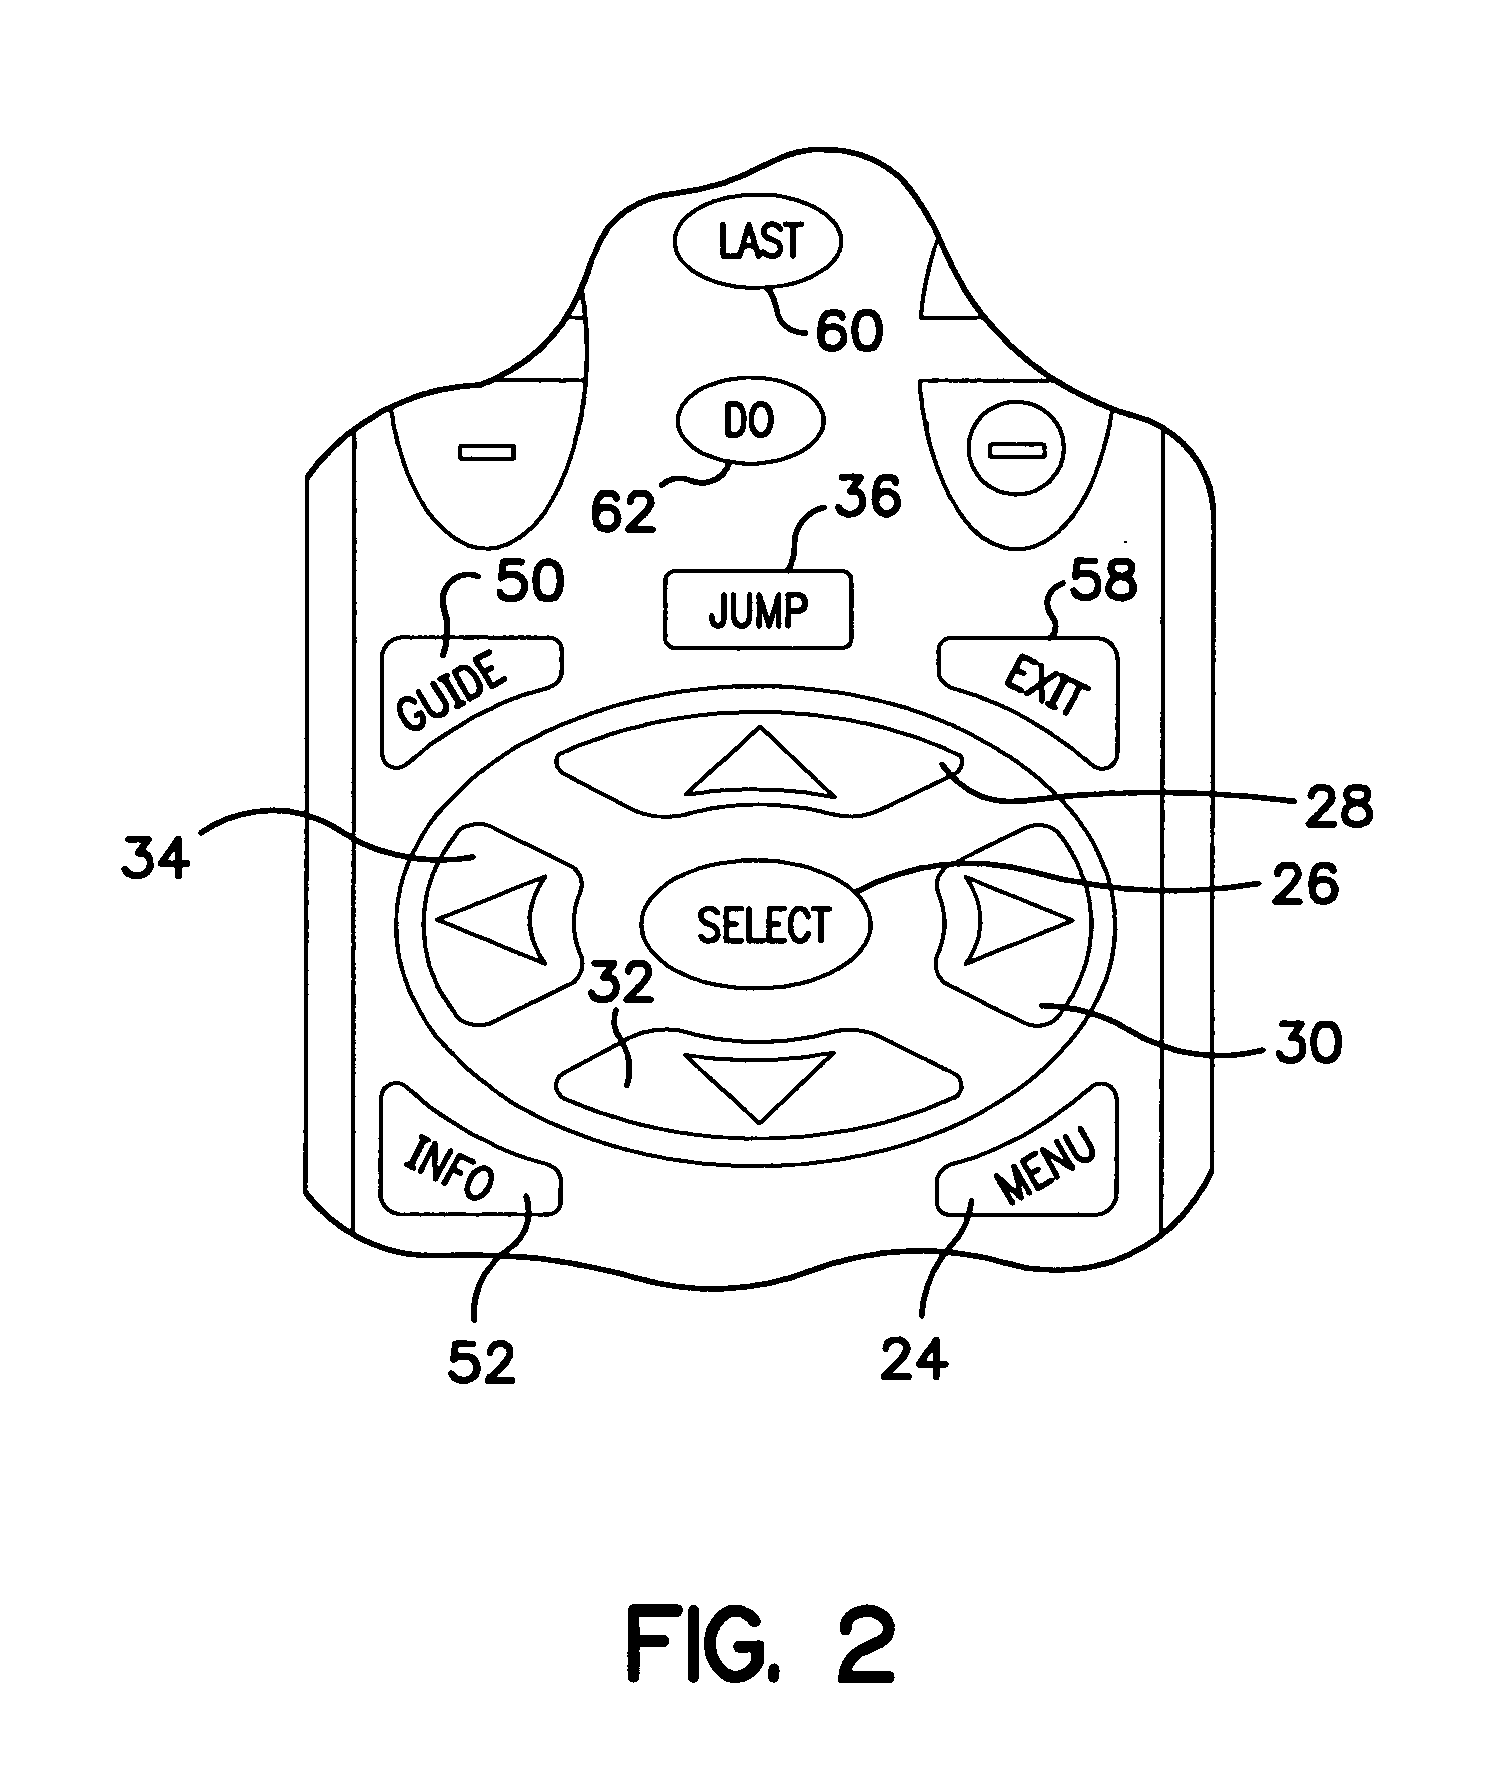 Consumer electronic navigation system and methods related thereto